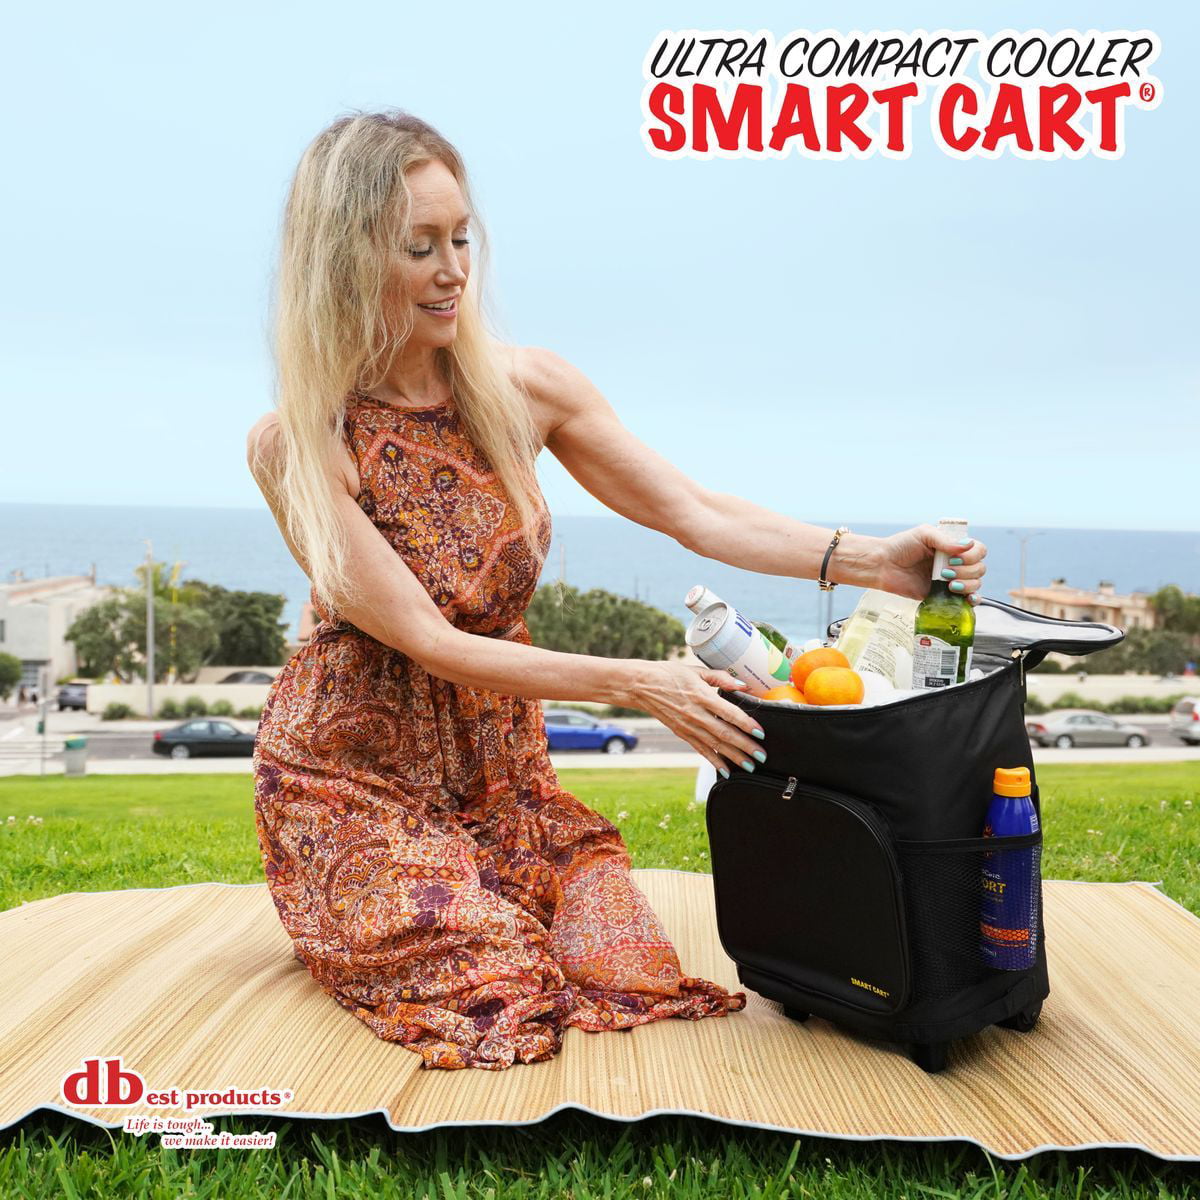 Black Insulated Collapsible Rolling Cooler Tailgating BBQ Beach Summer Cooler Smart Cart 